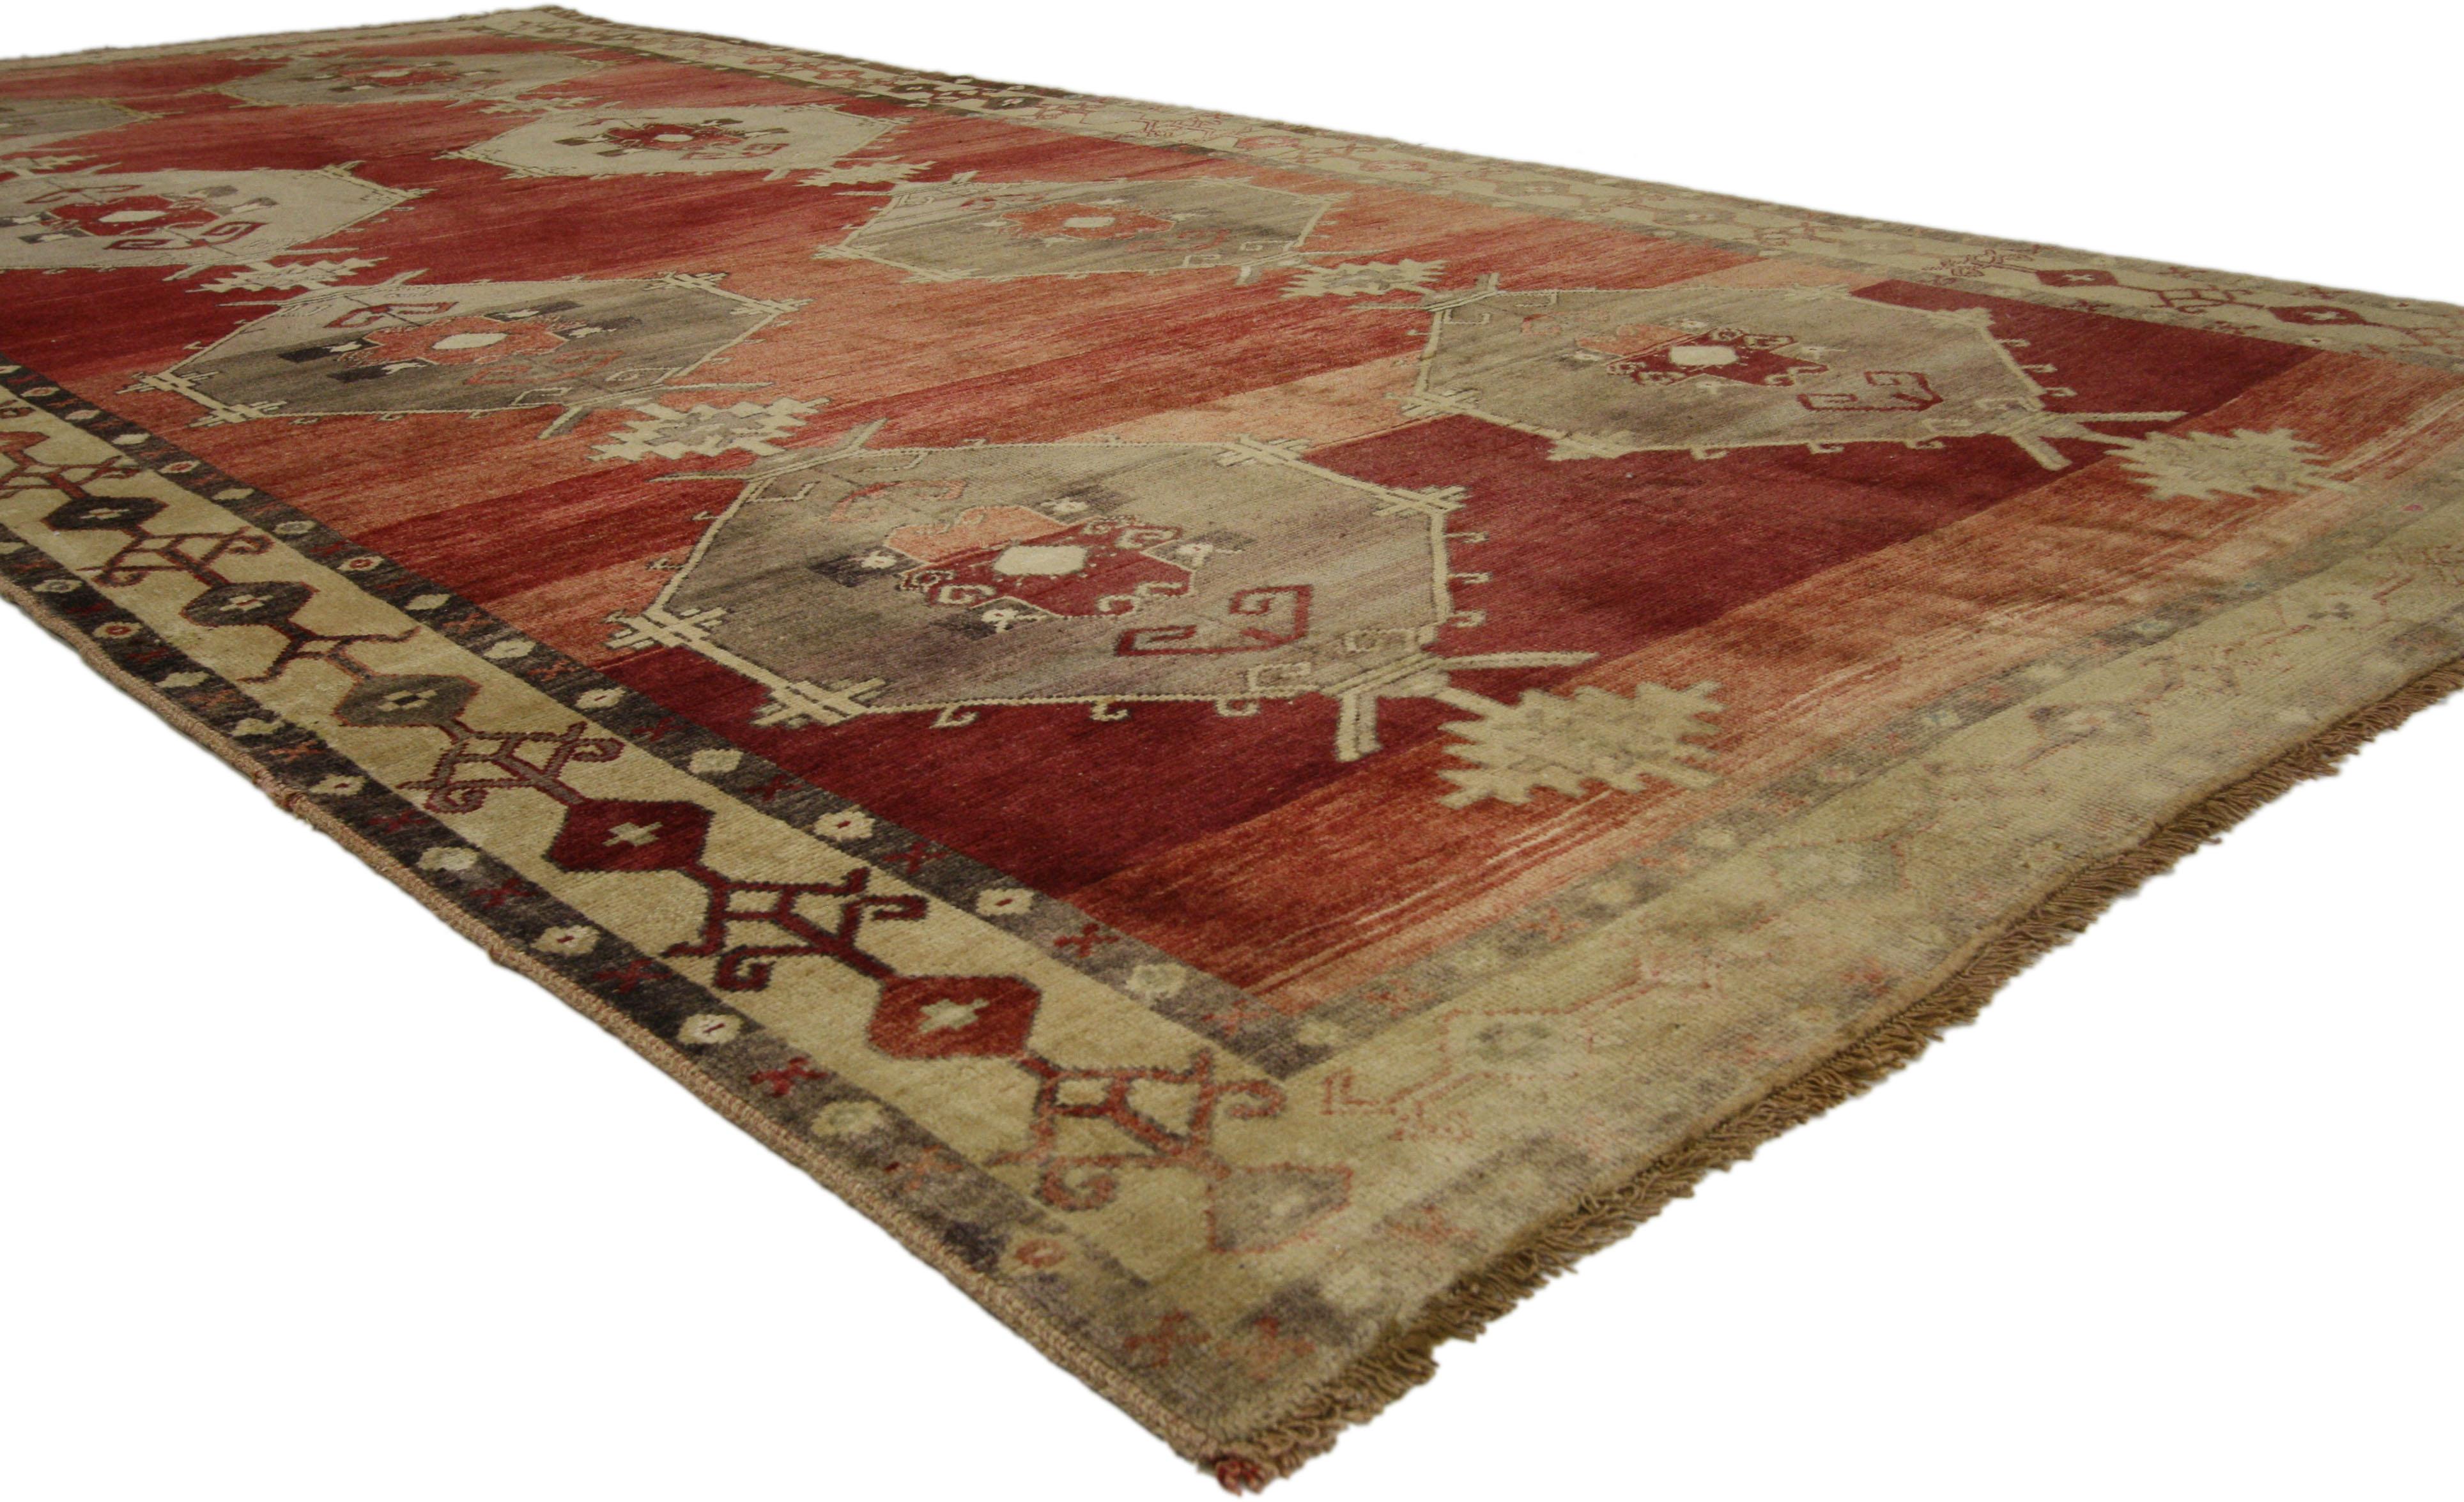 51445 Mid-Century Modern Style Vintage Turkish Oushak Gallery Rug, Wide Hallway Runner. Warm and inviting combined with the right amount of Mid-Century Modern style and tribal elements, this hand-knotted wool vintage Turkish Oushak gallery rug